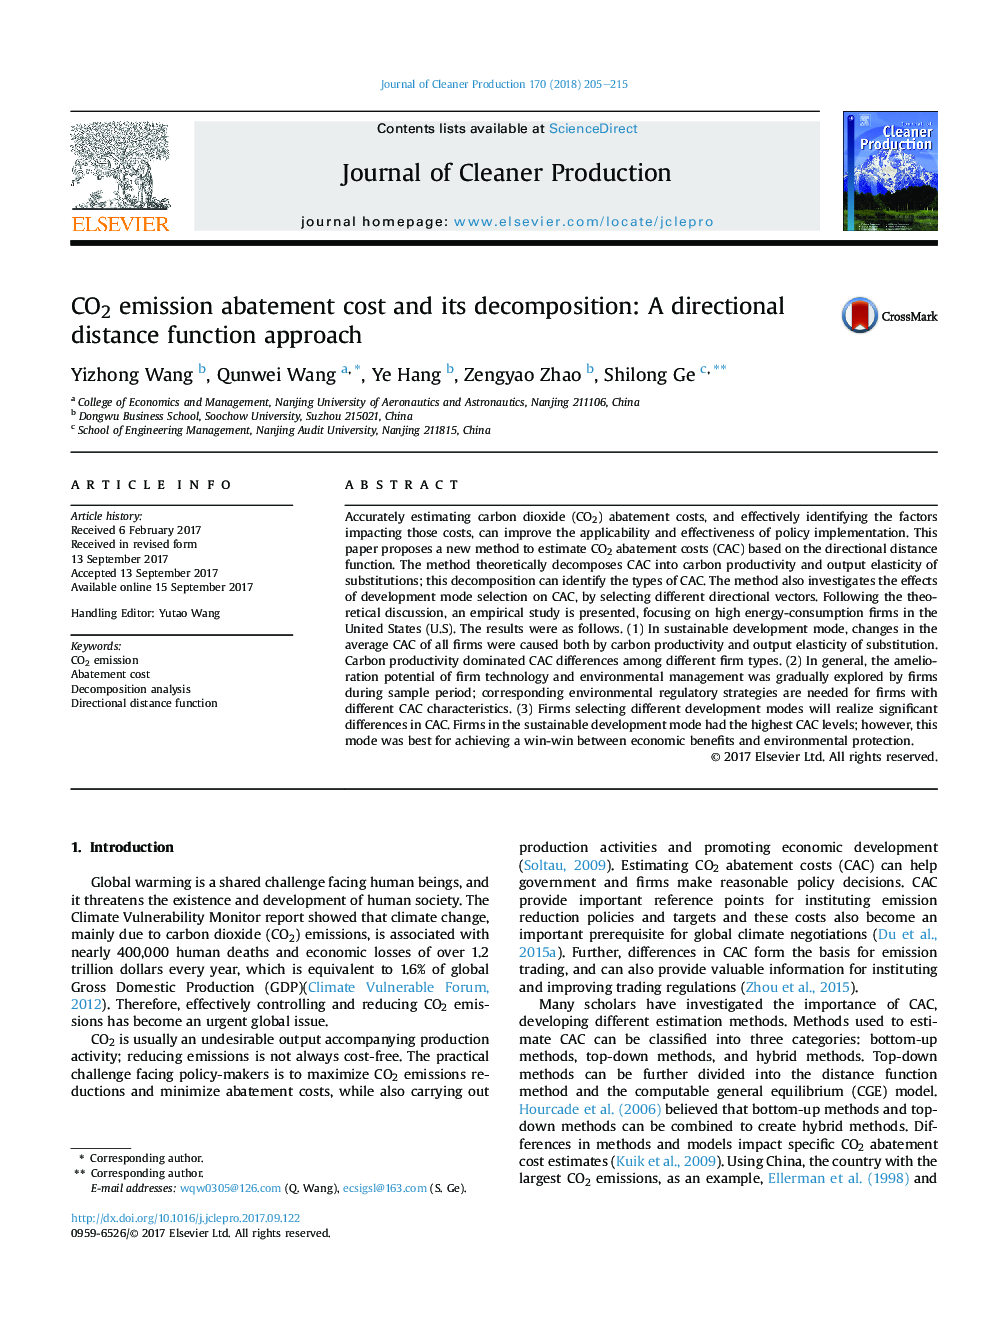 CO2 emission abatement cost and its decomposition: A directional distance function approach